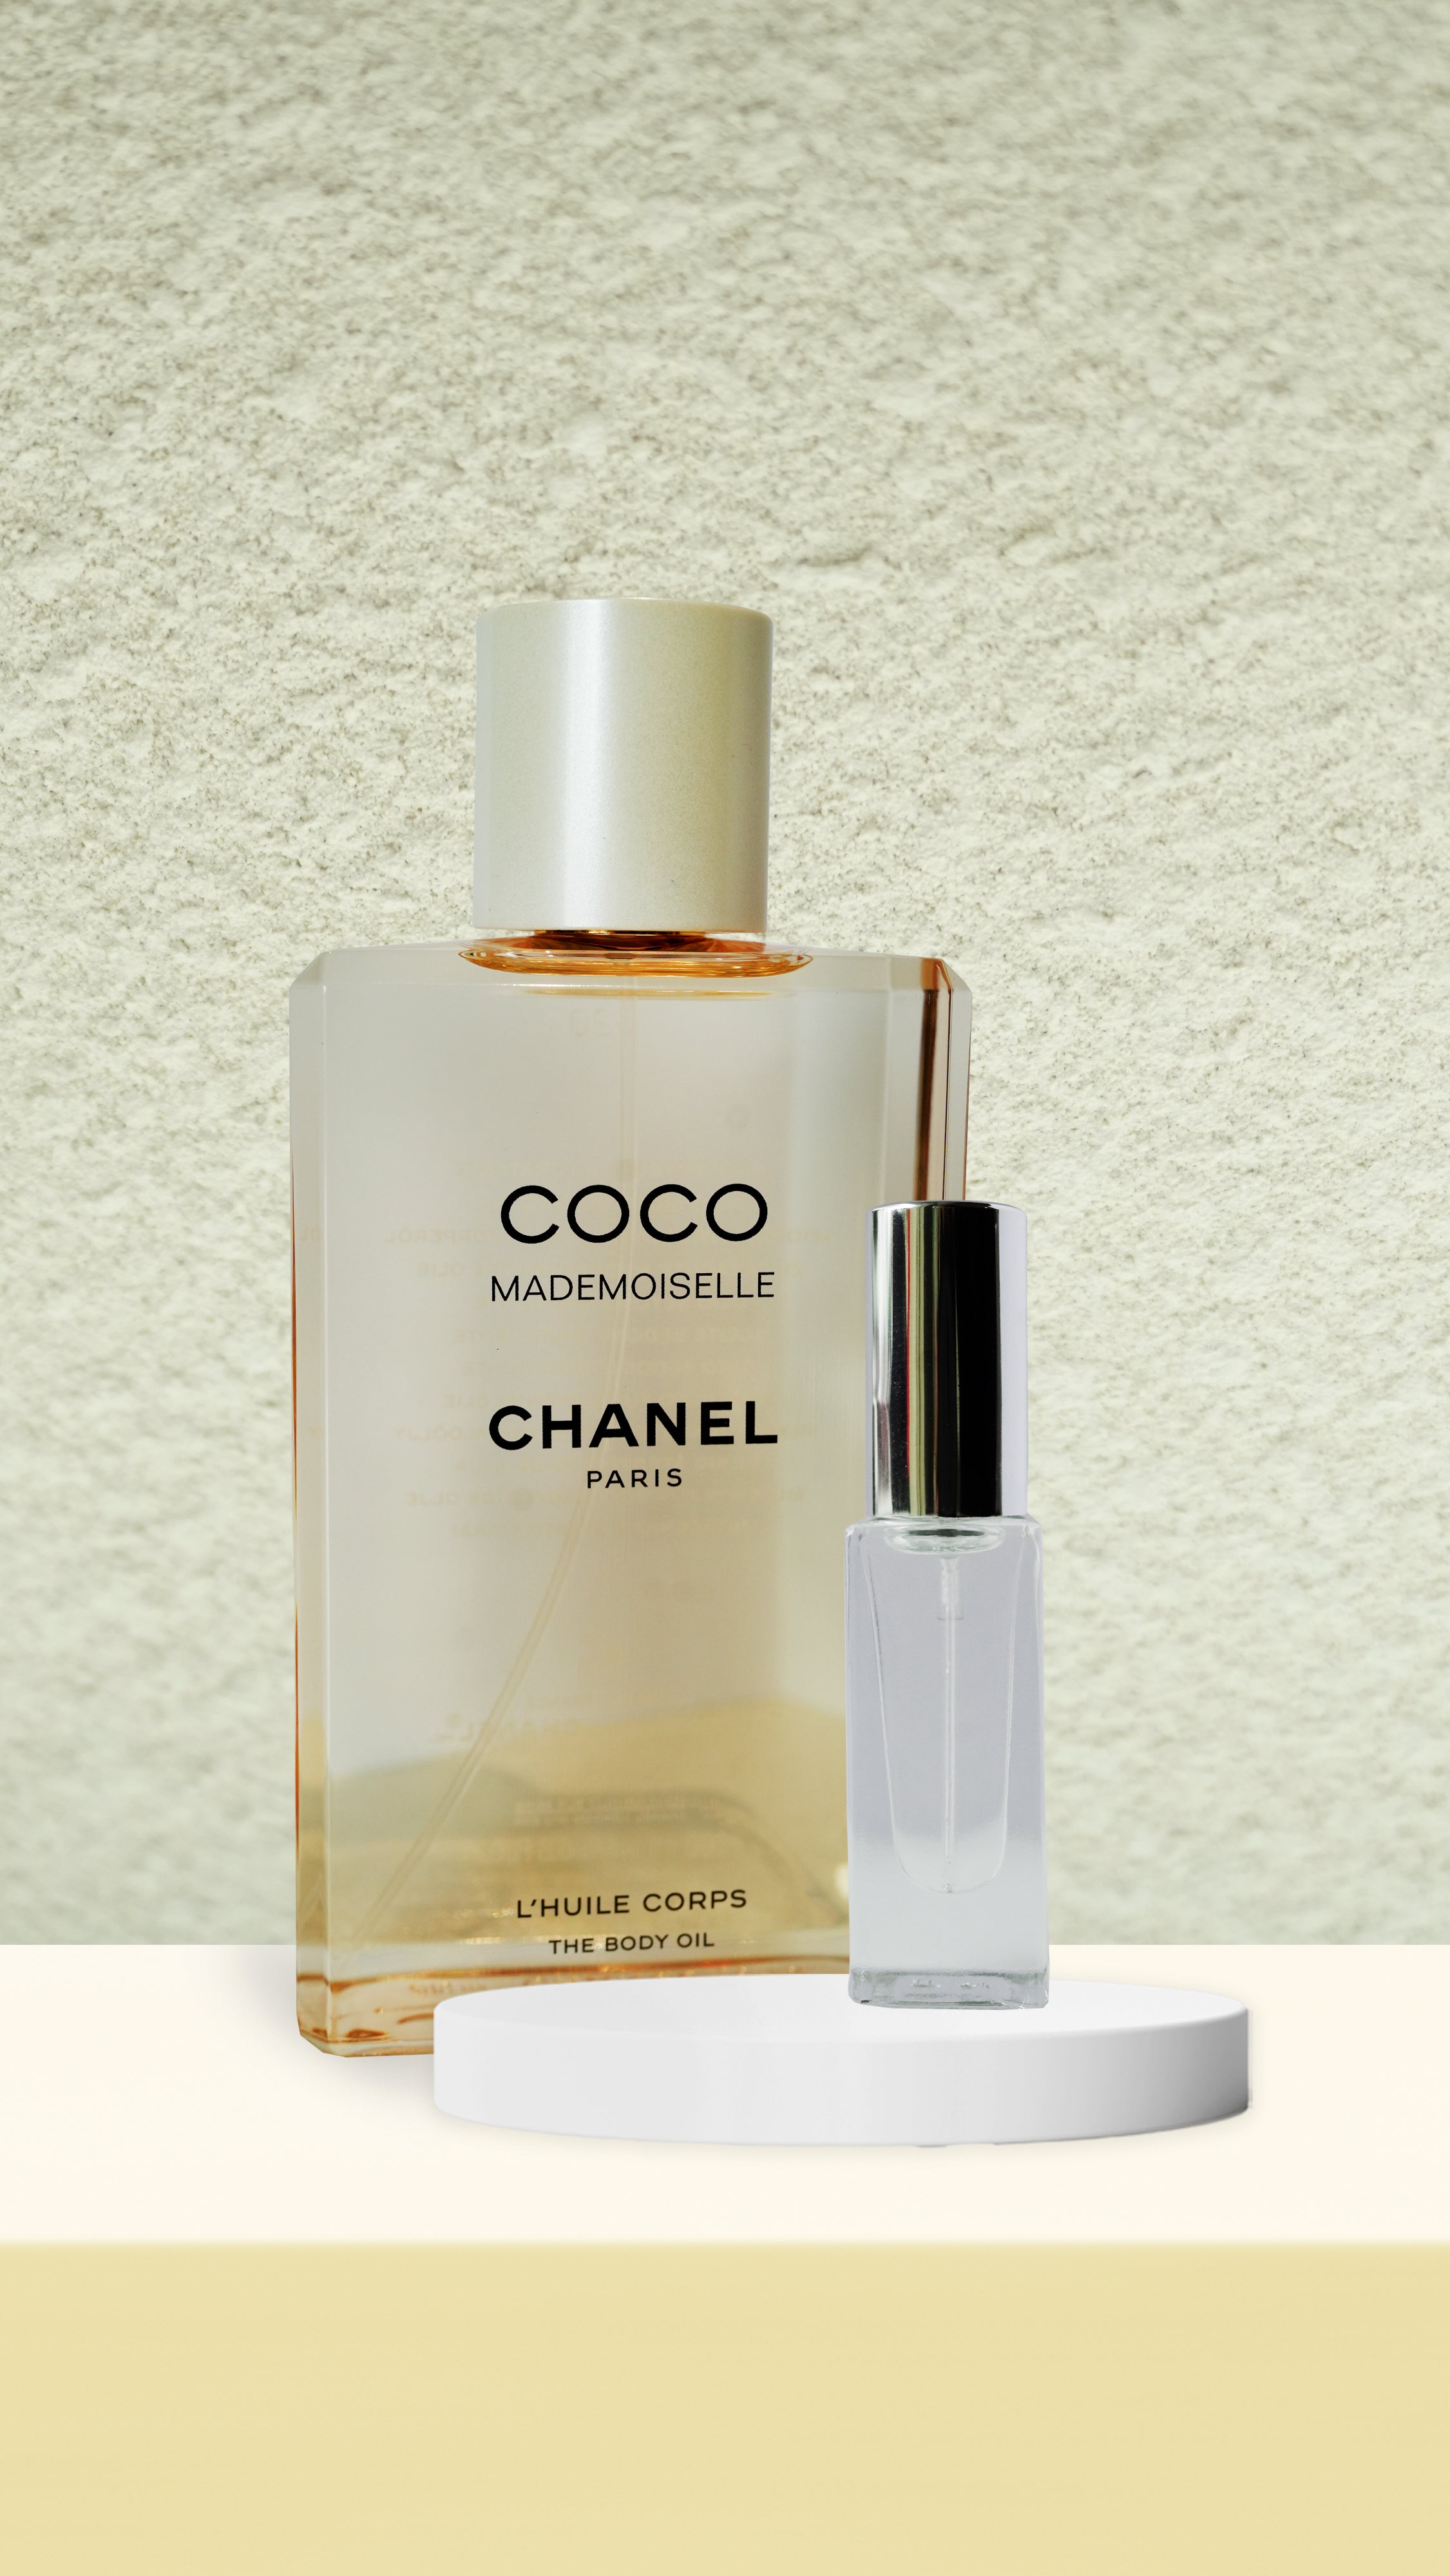 COCO MADEMOISELLE CHANEL THE BODY OIL TESTERS IN 5ml 🤩 #thriftcosmeti